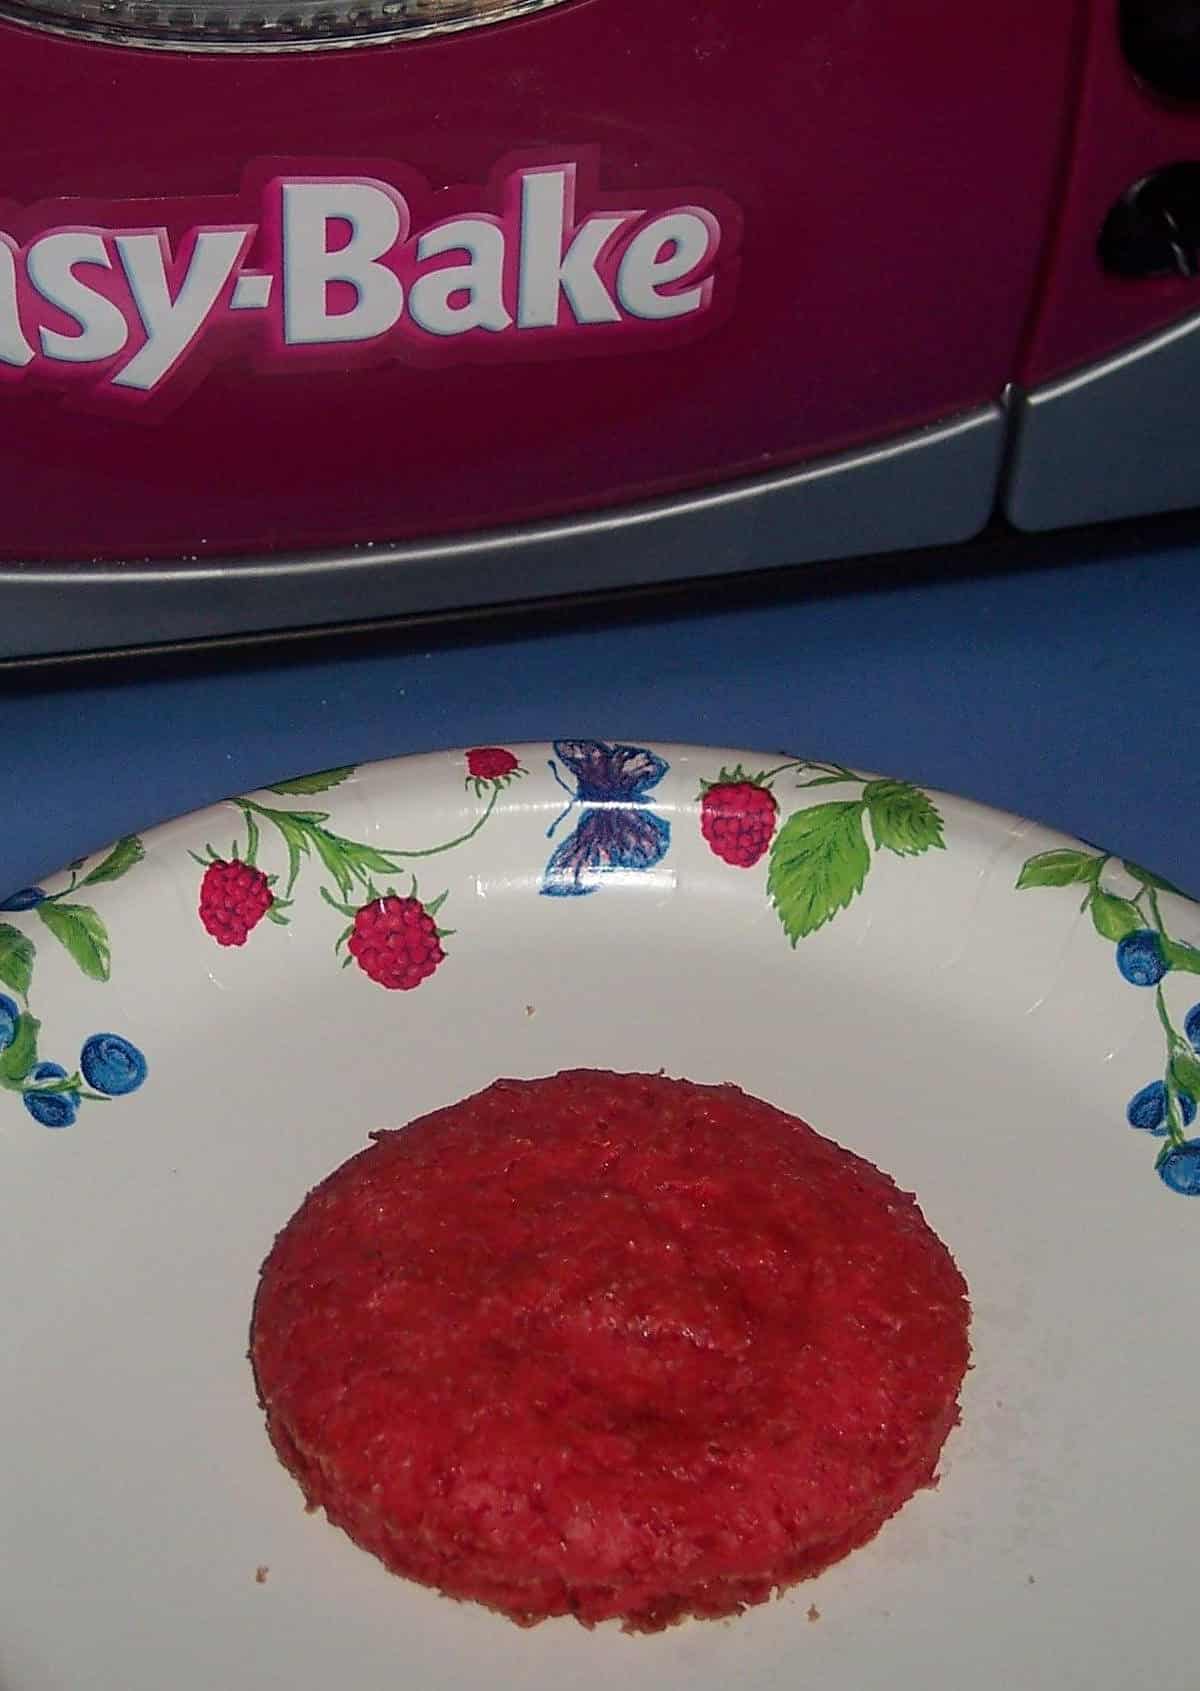 Easy Bake Oven Barbie's Pretty Pink Cake